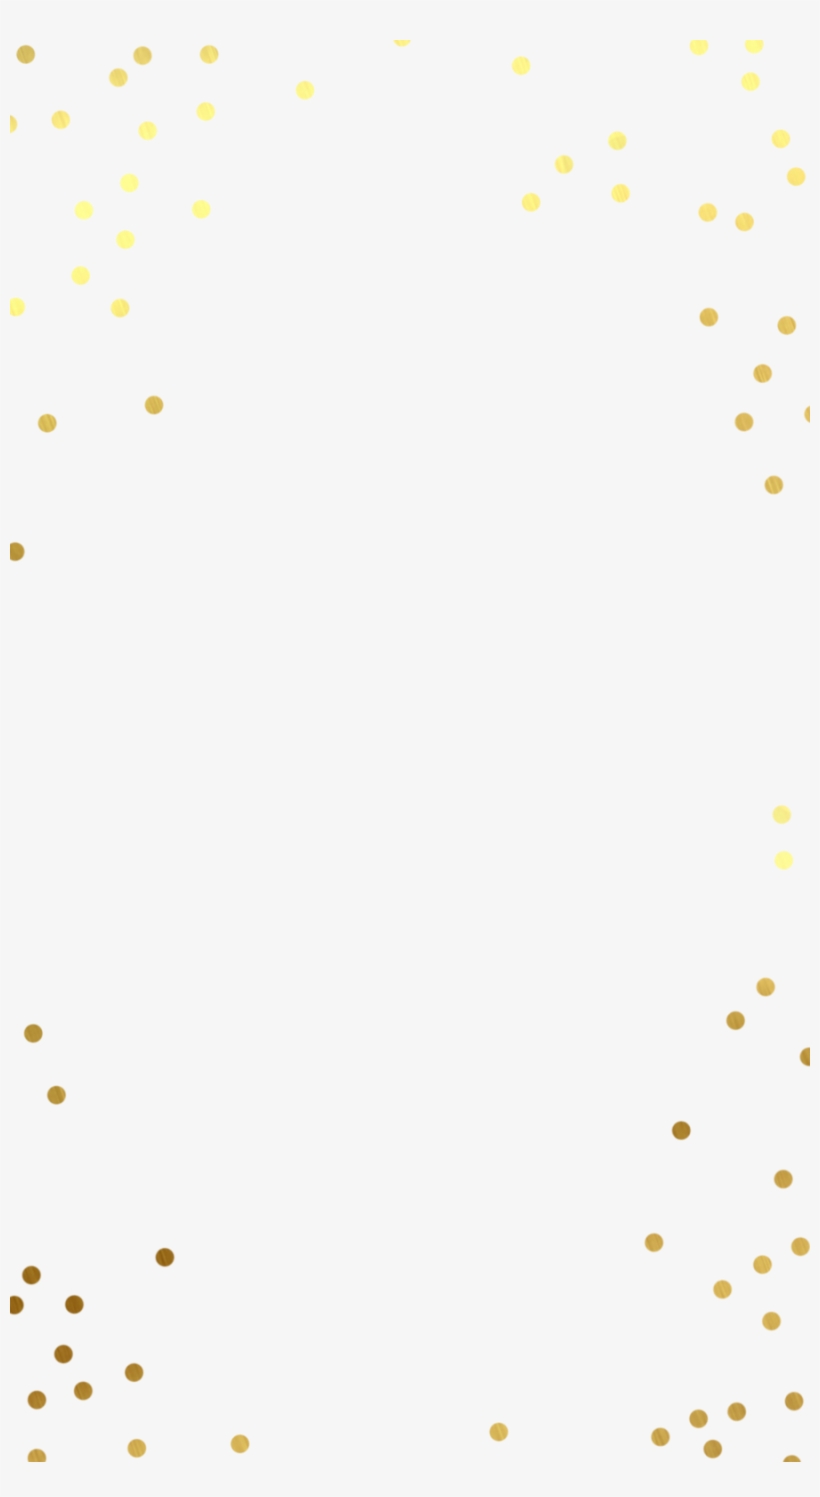 Gold Confetti Png 1080 X 1920 Clipart Confetti - Snapchat, transparent png #144992